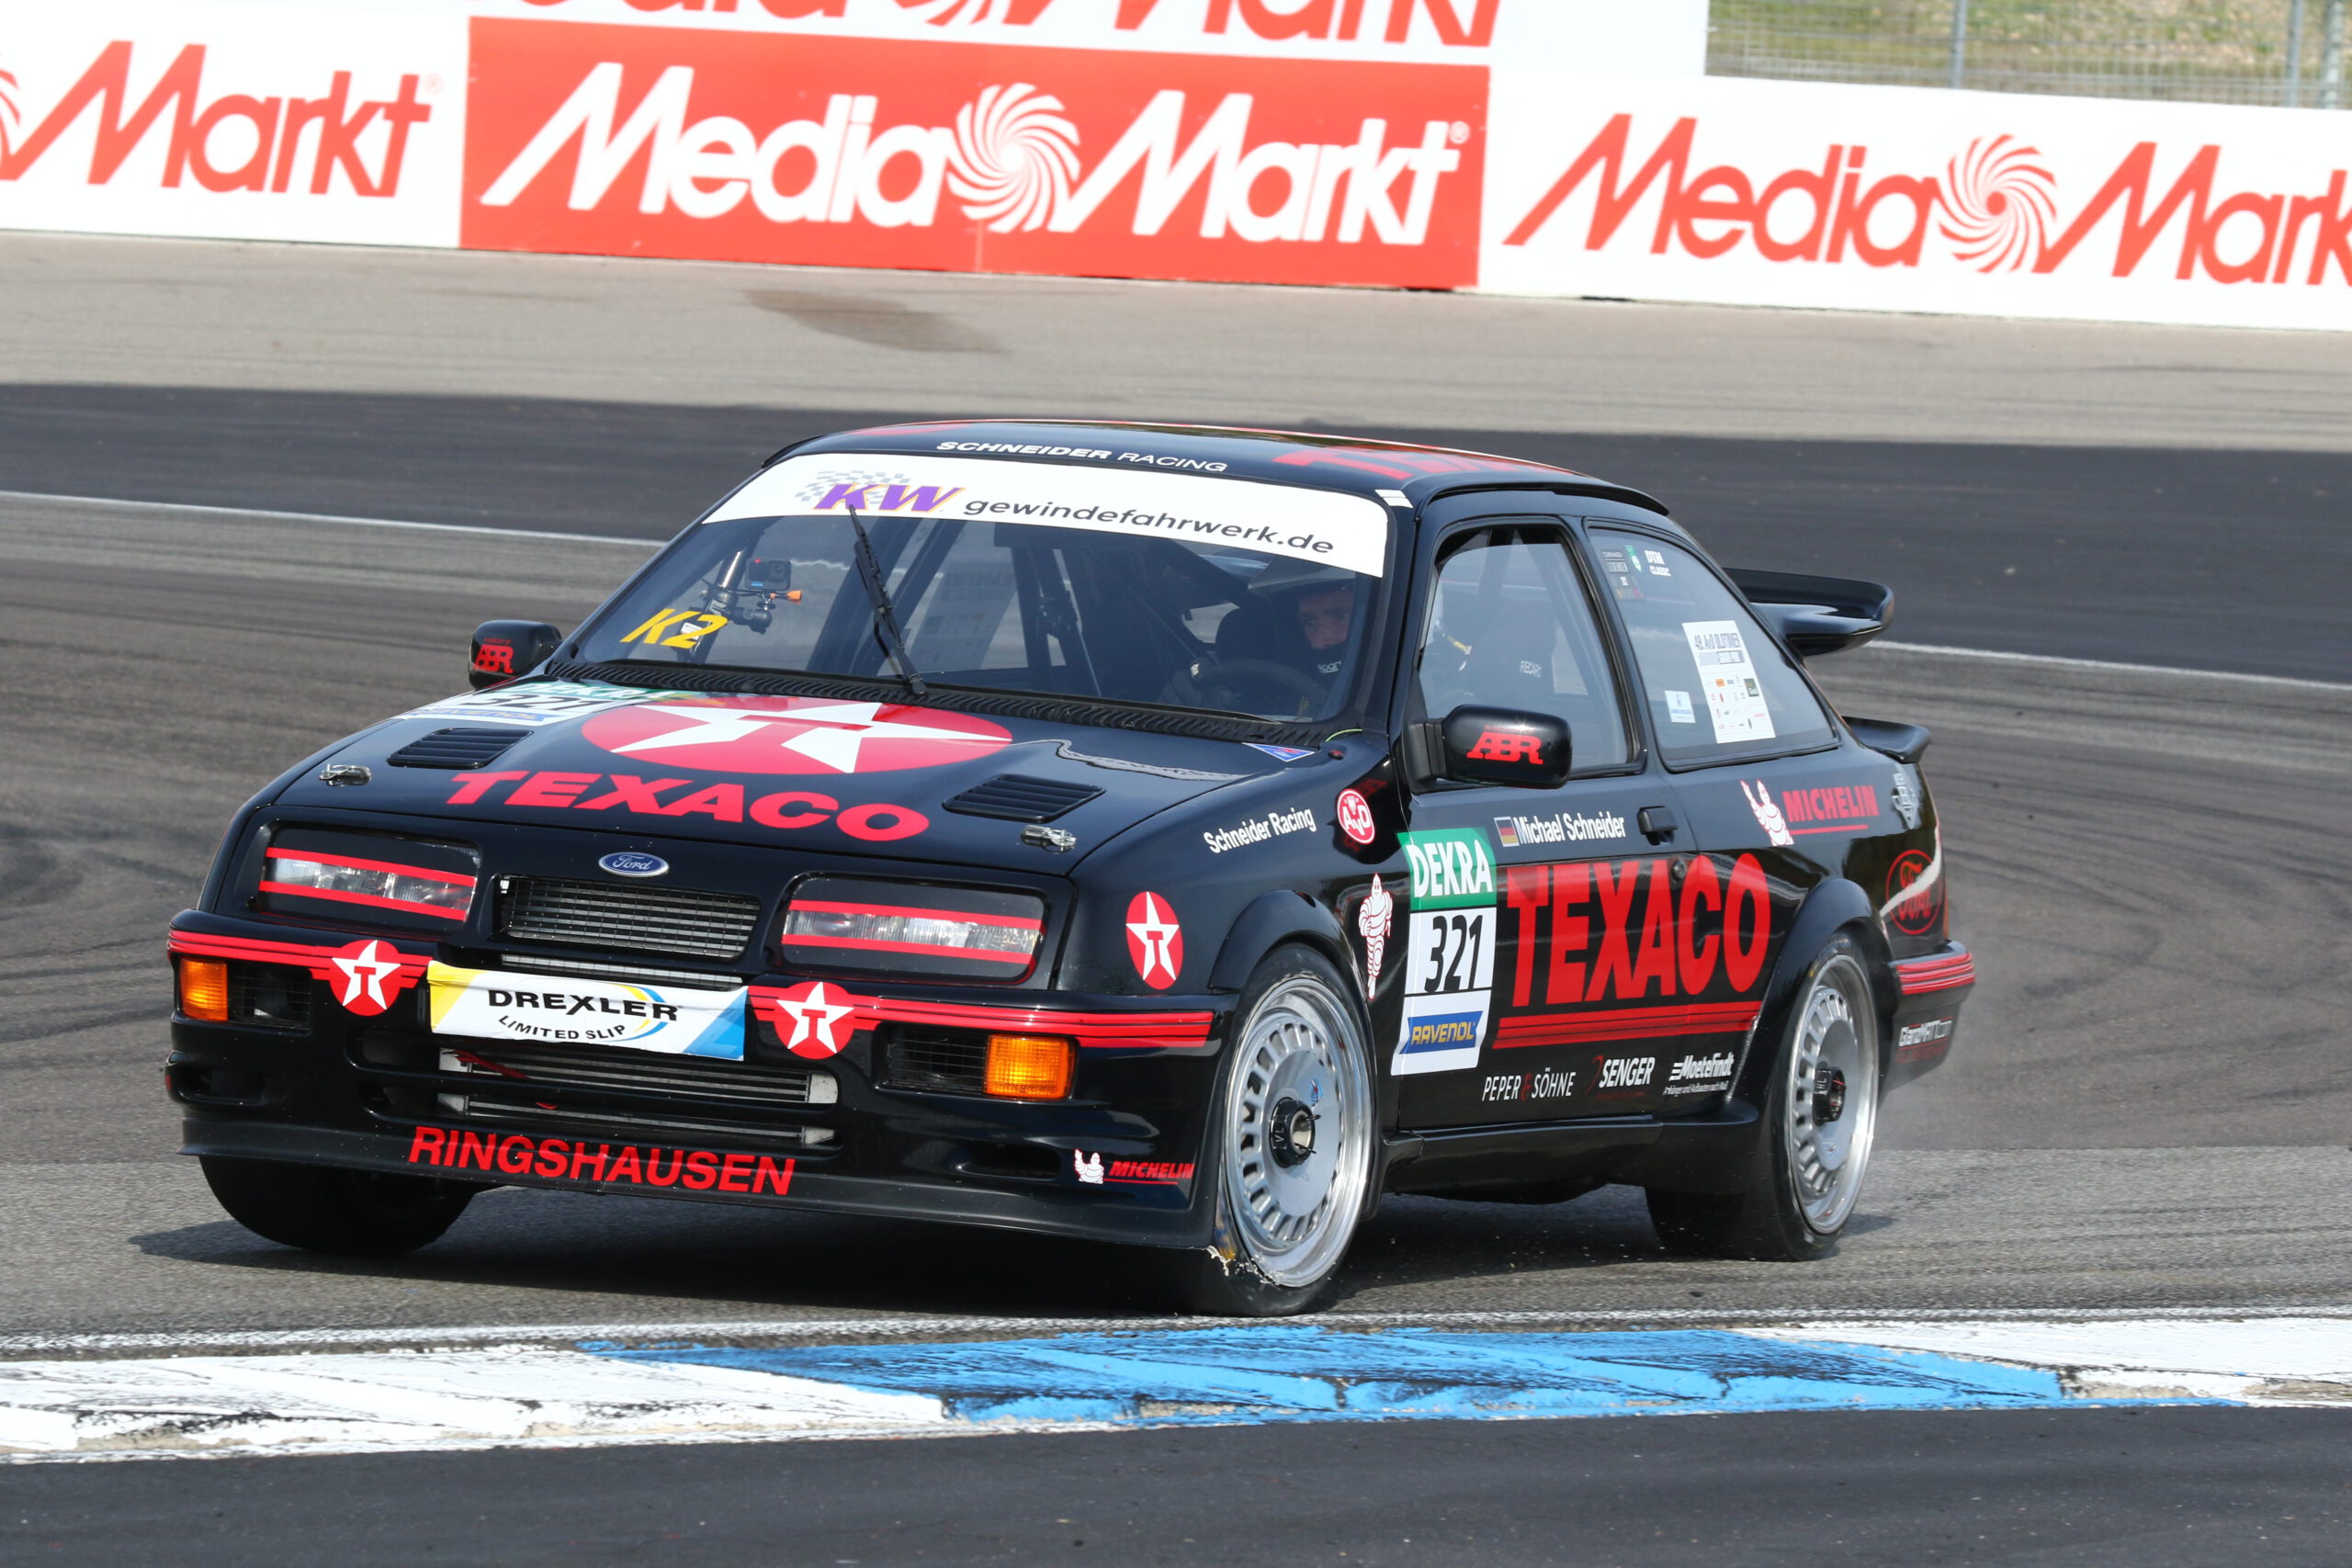 DTM-Classic-Cup-2022-Ringshausen-Motorsport-Revival-Team-Michael-Schneider-Ford-Sierra-RS-Cosworth-2235870